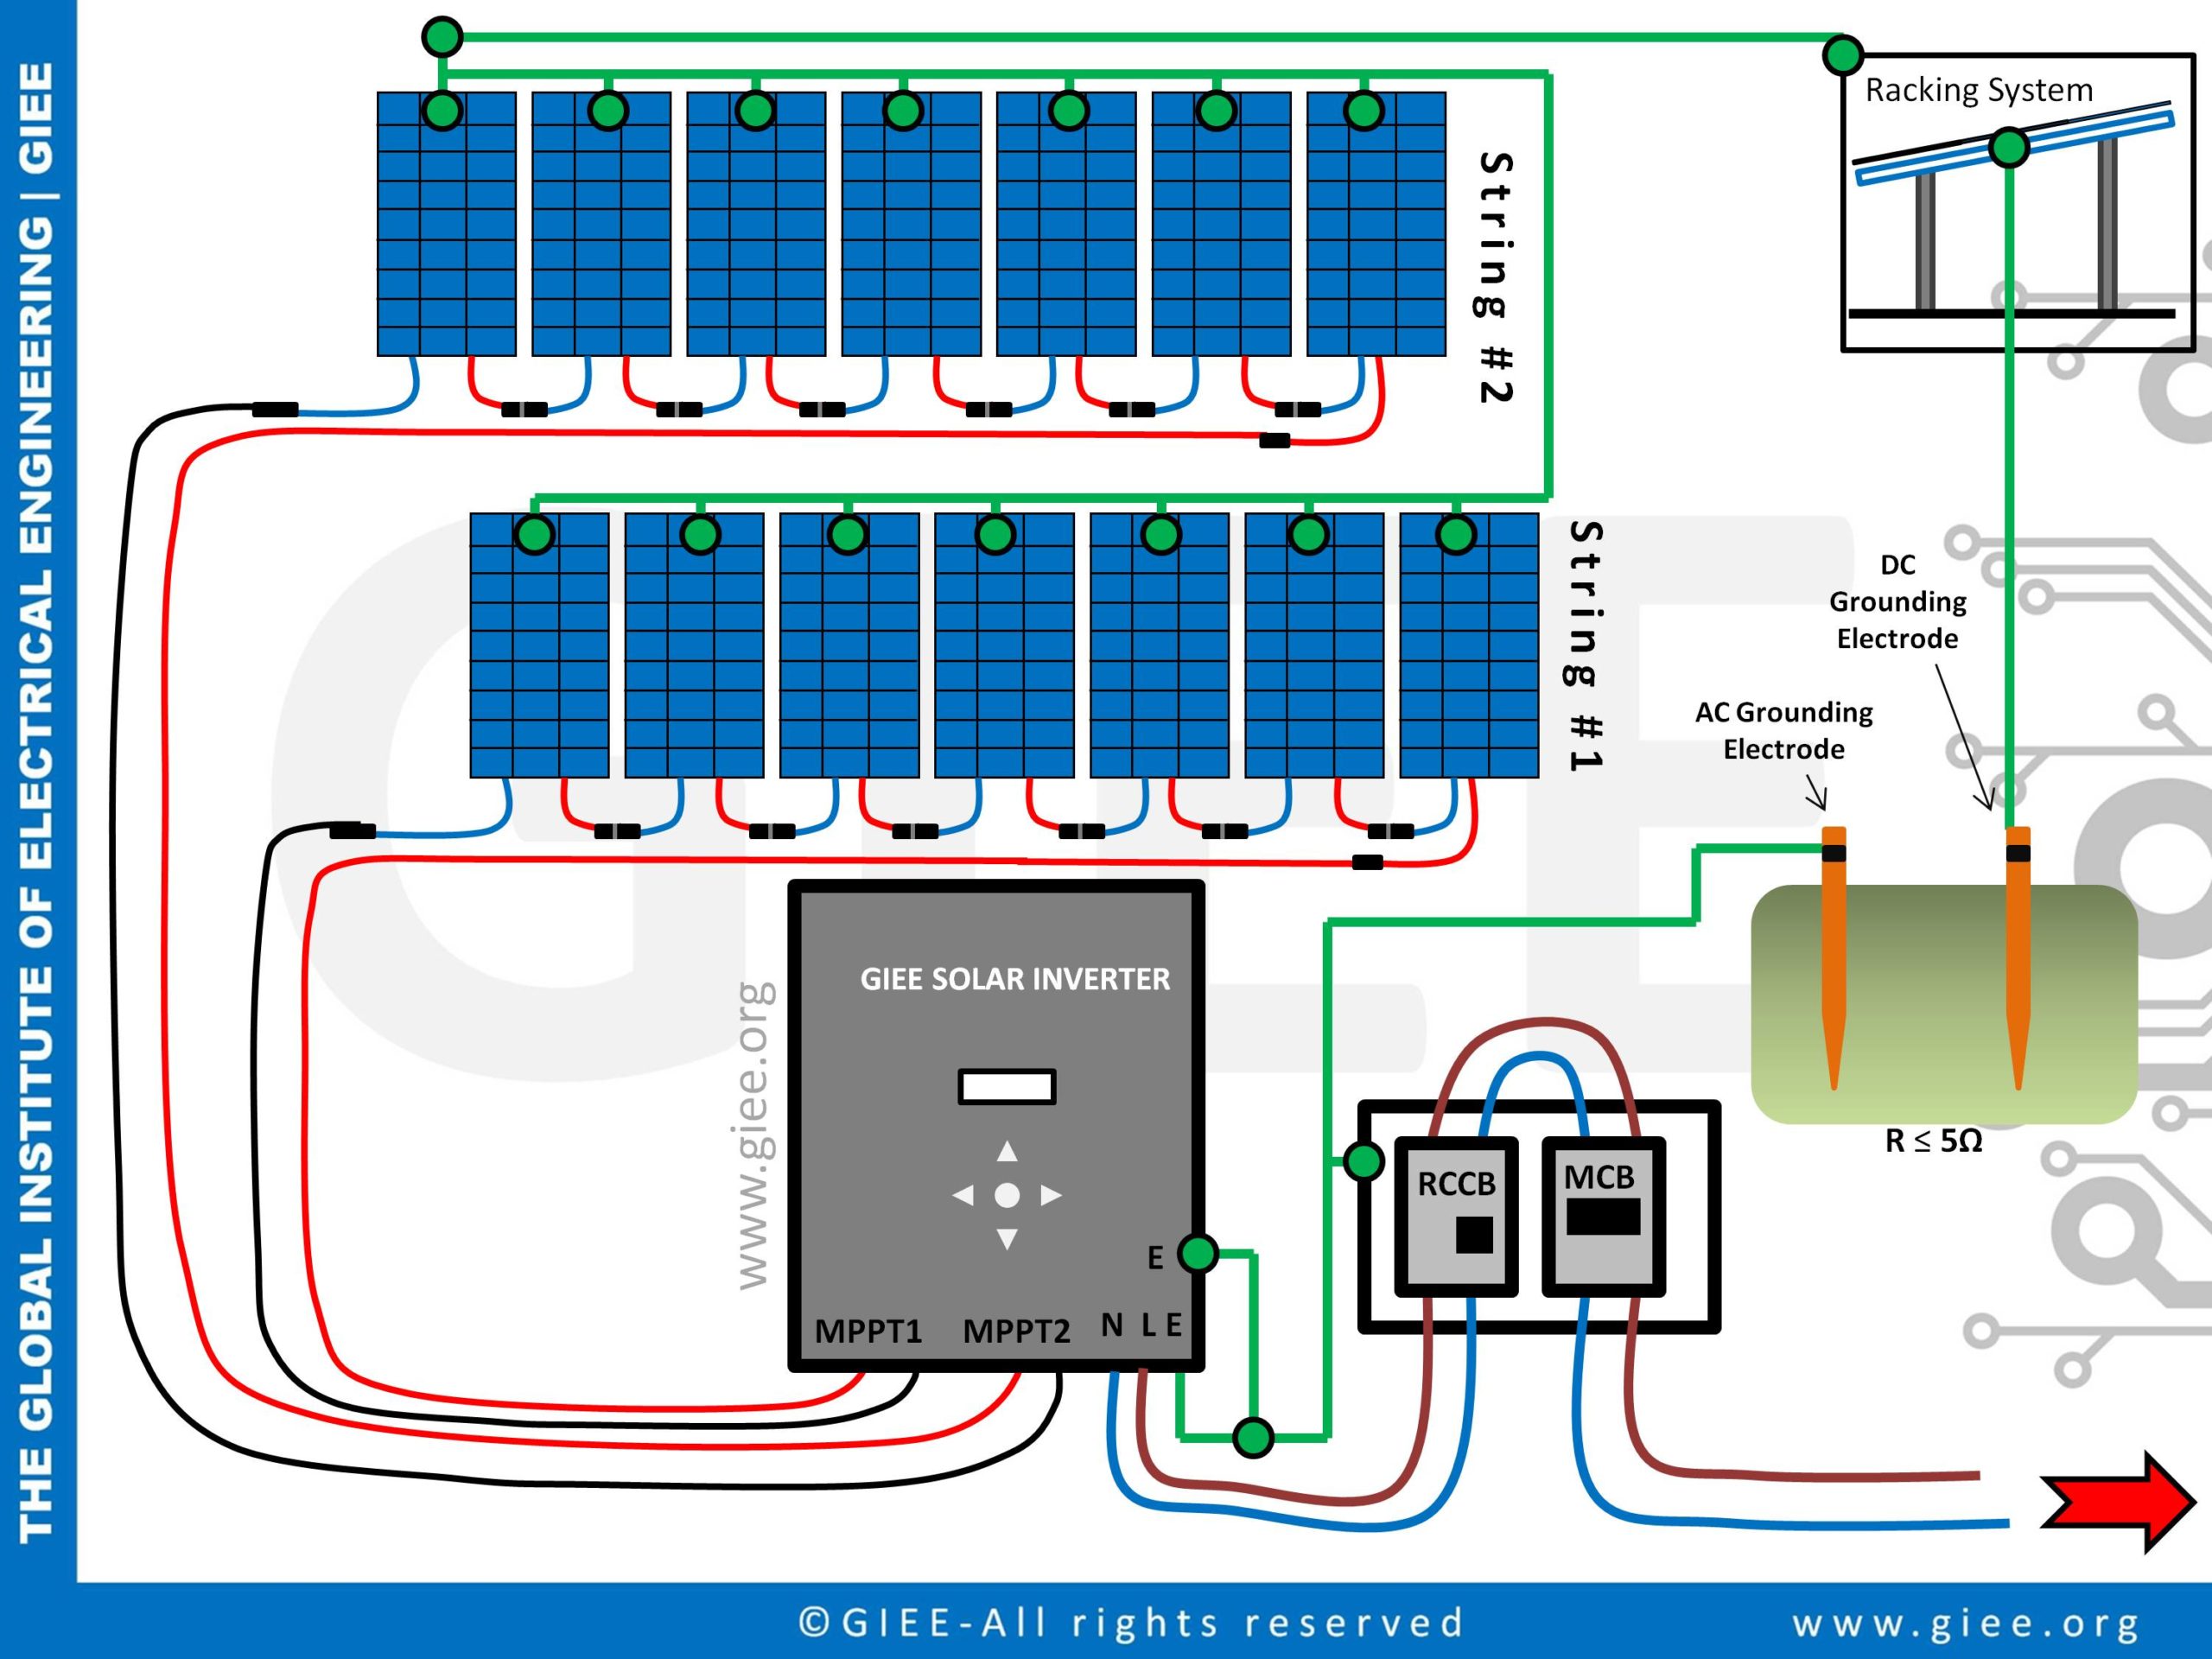 OnGrid Solar PV System Design & Installation Course (15hrs)